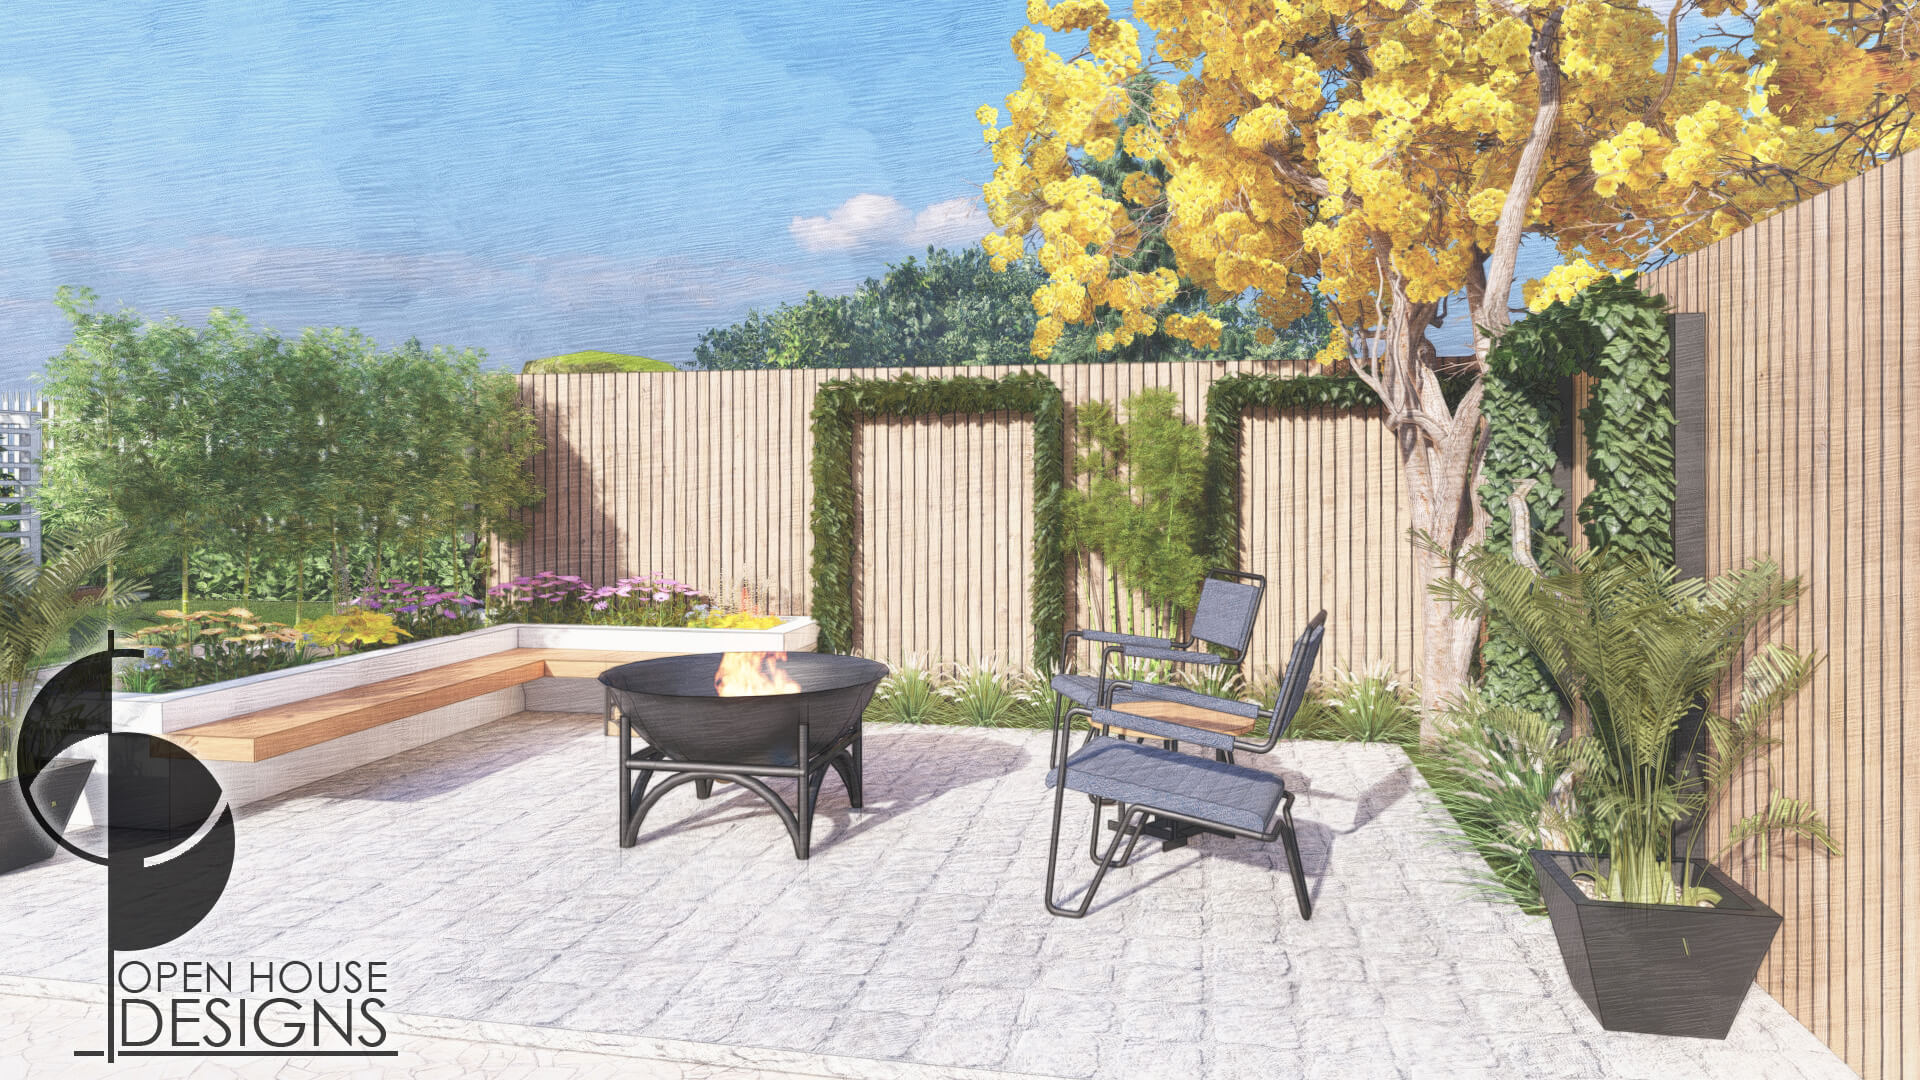 Landscape Design with pergola, patio, flower beds and more